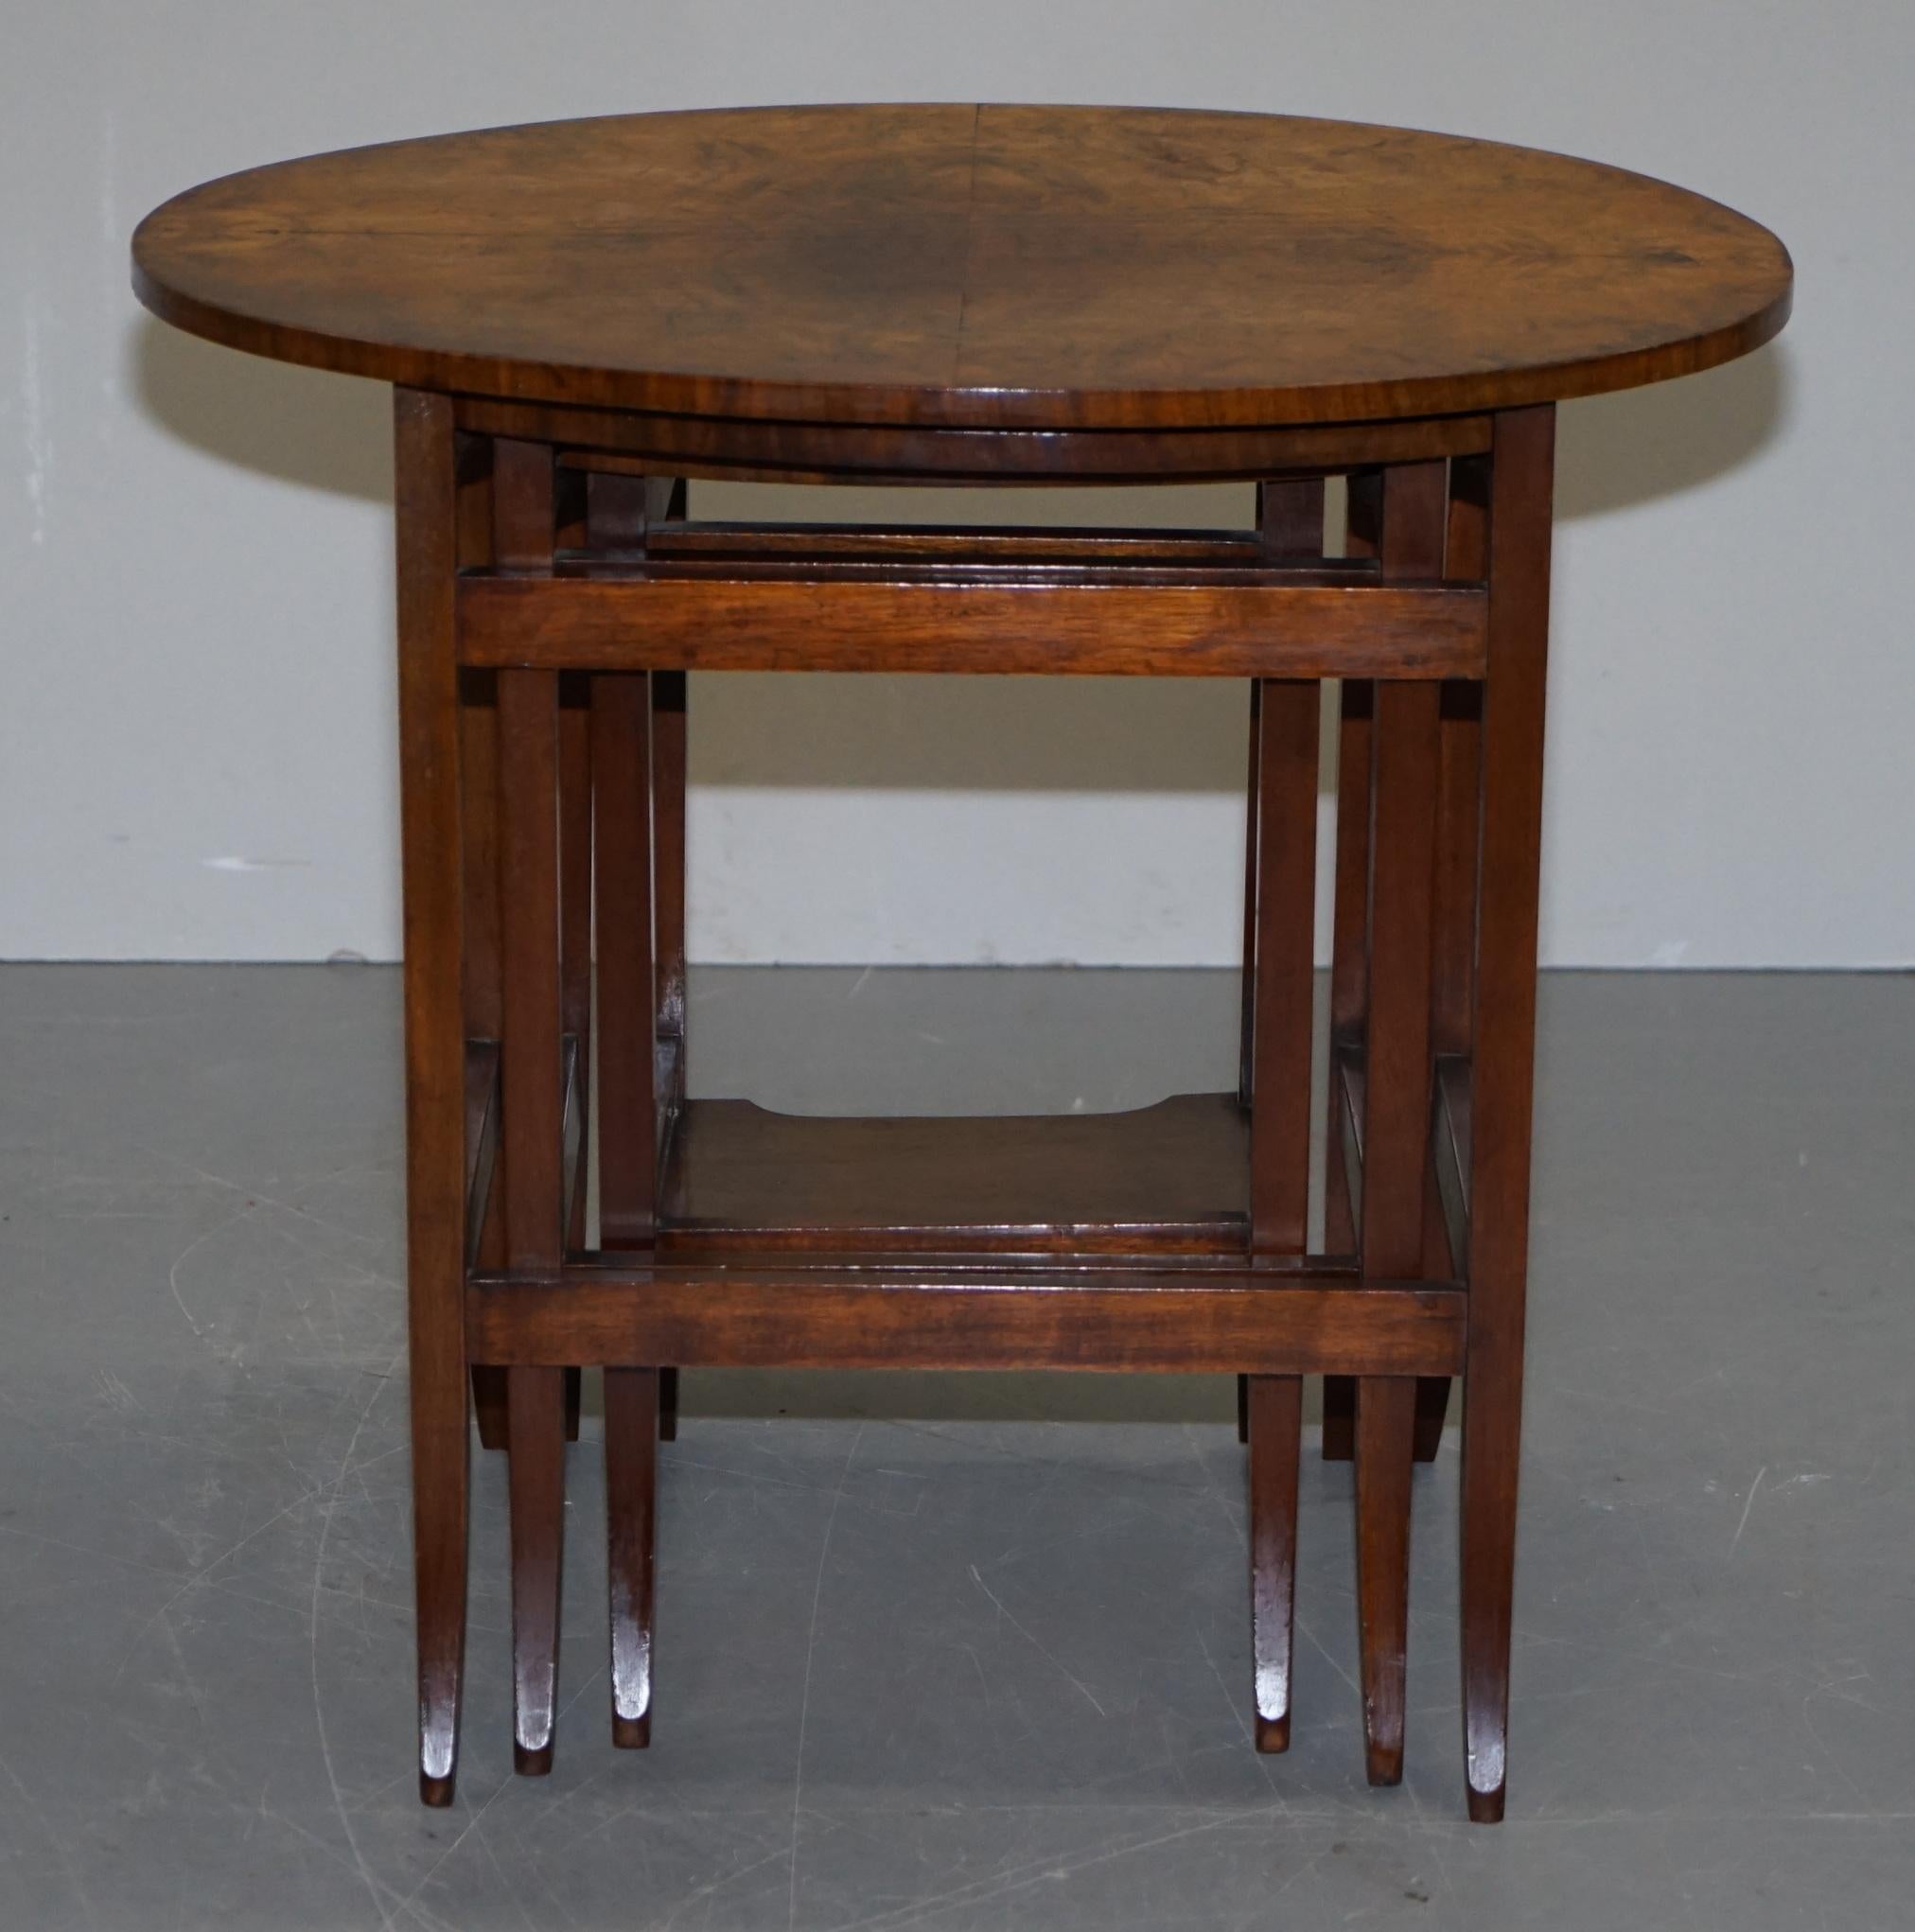 Lovely circa 1900 Late Victorian Burr Walnut Nest of Tables with Oval Main Piece For Sale 3